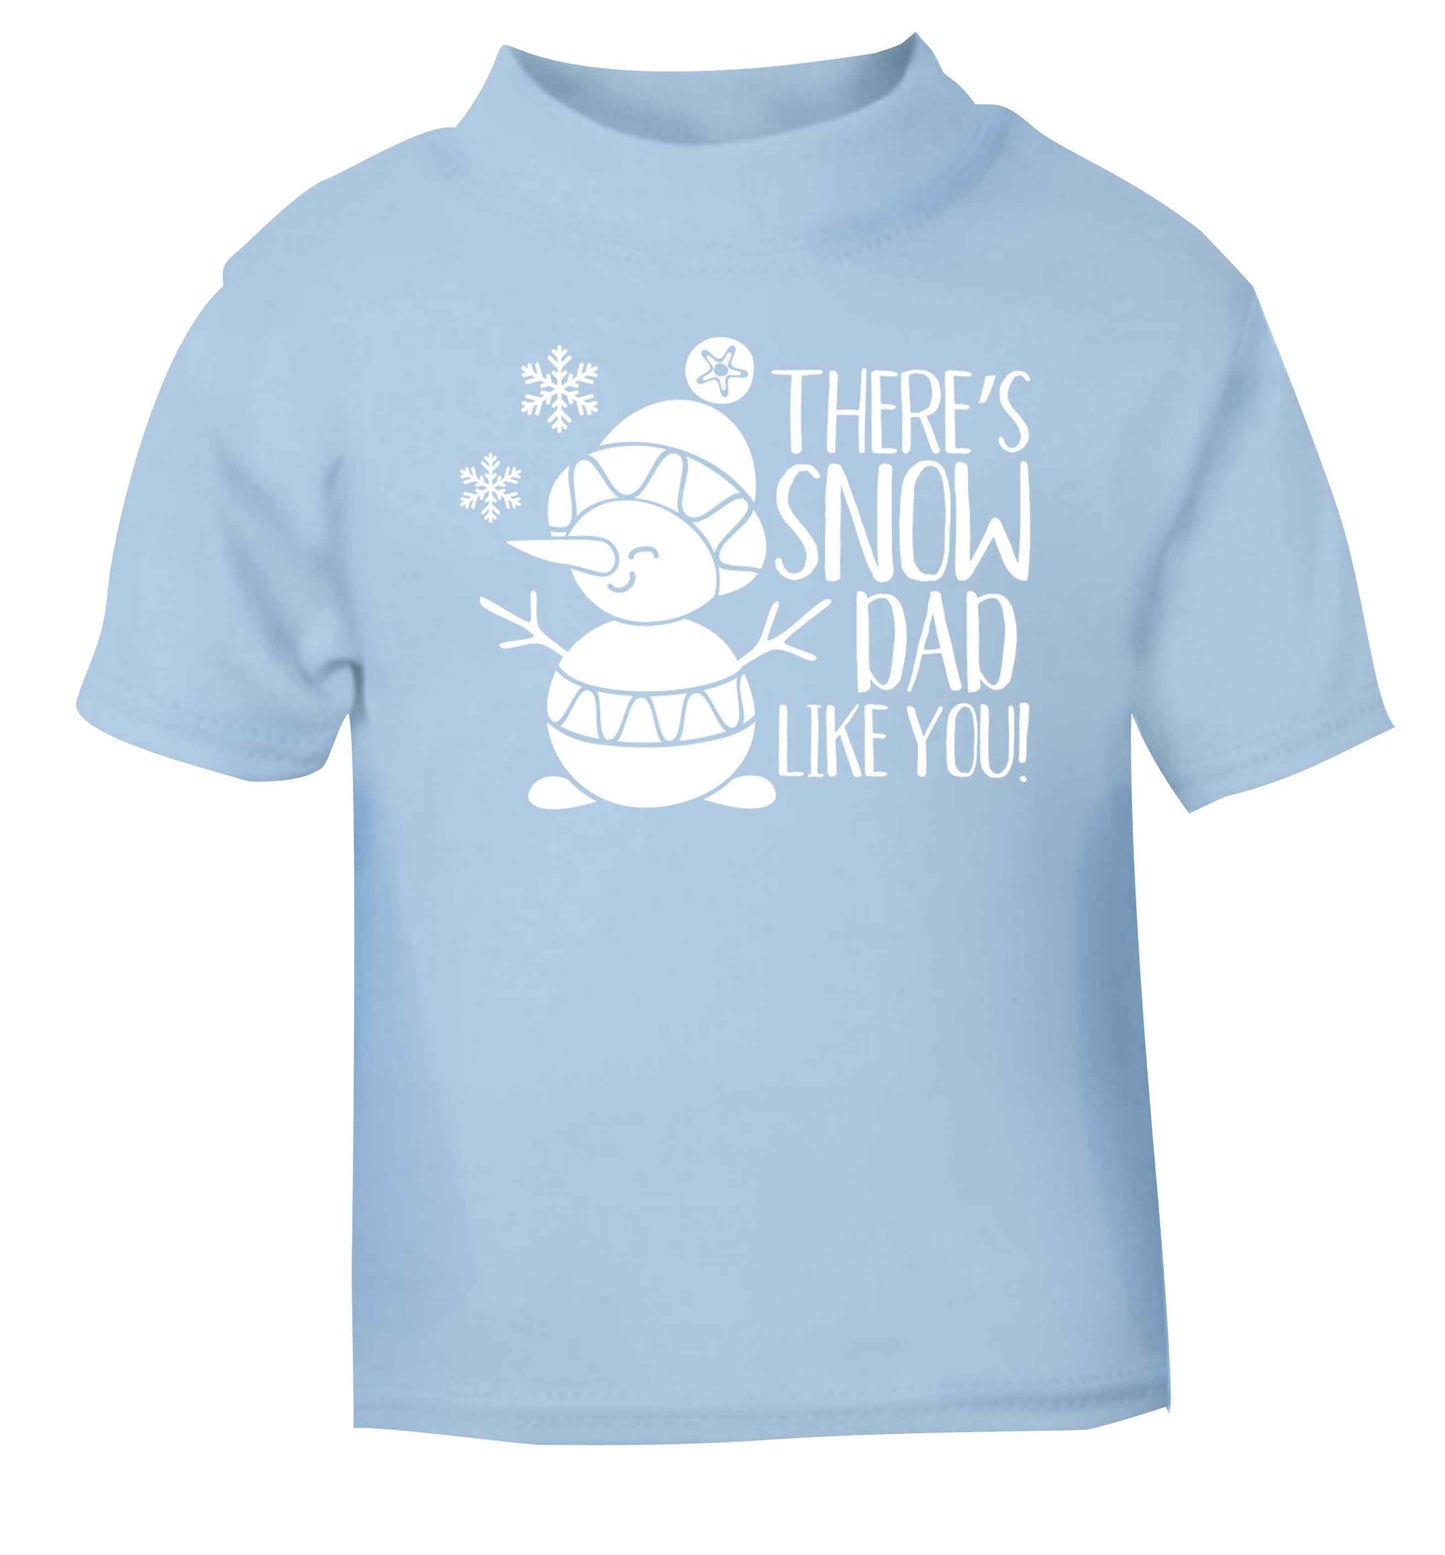 There's snow dad like you light blue baby toddler Tshirt 2 Years